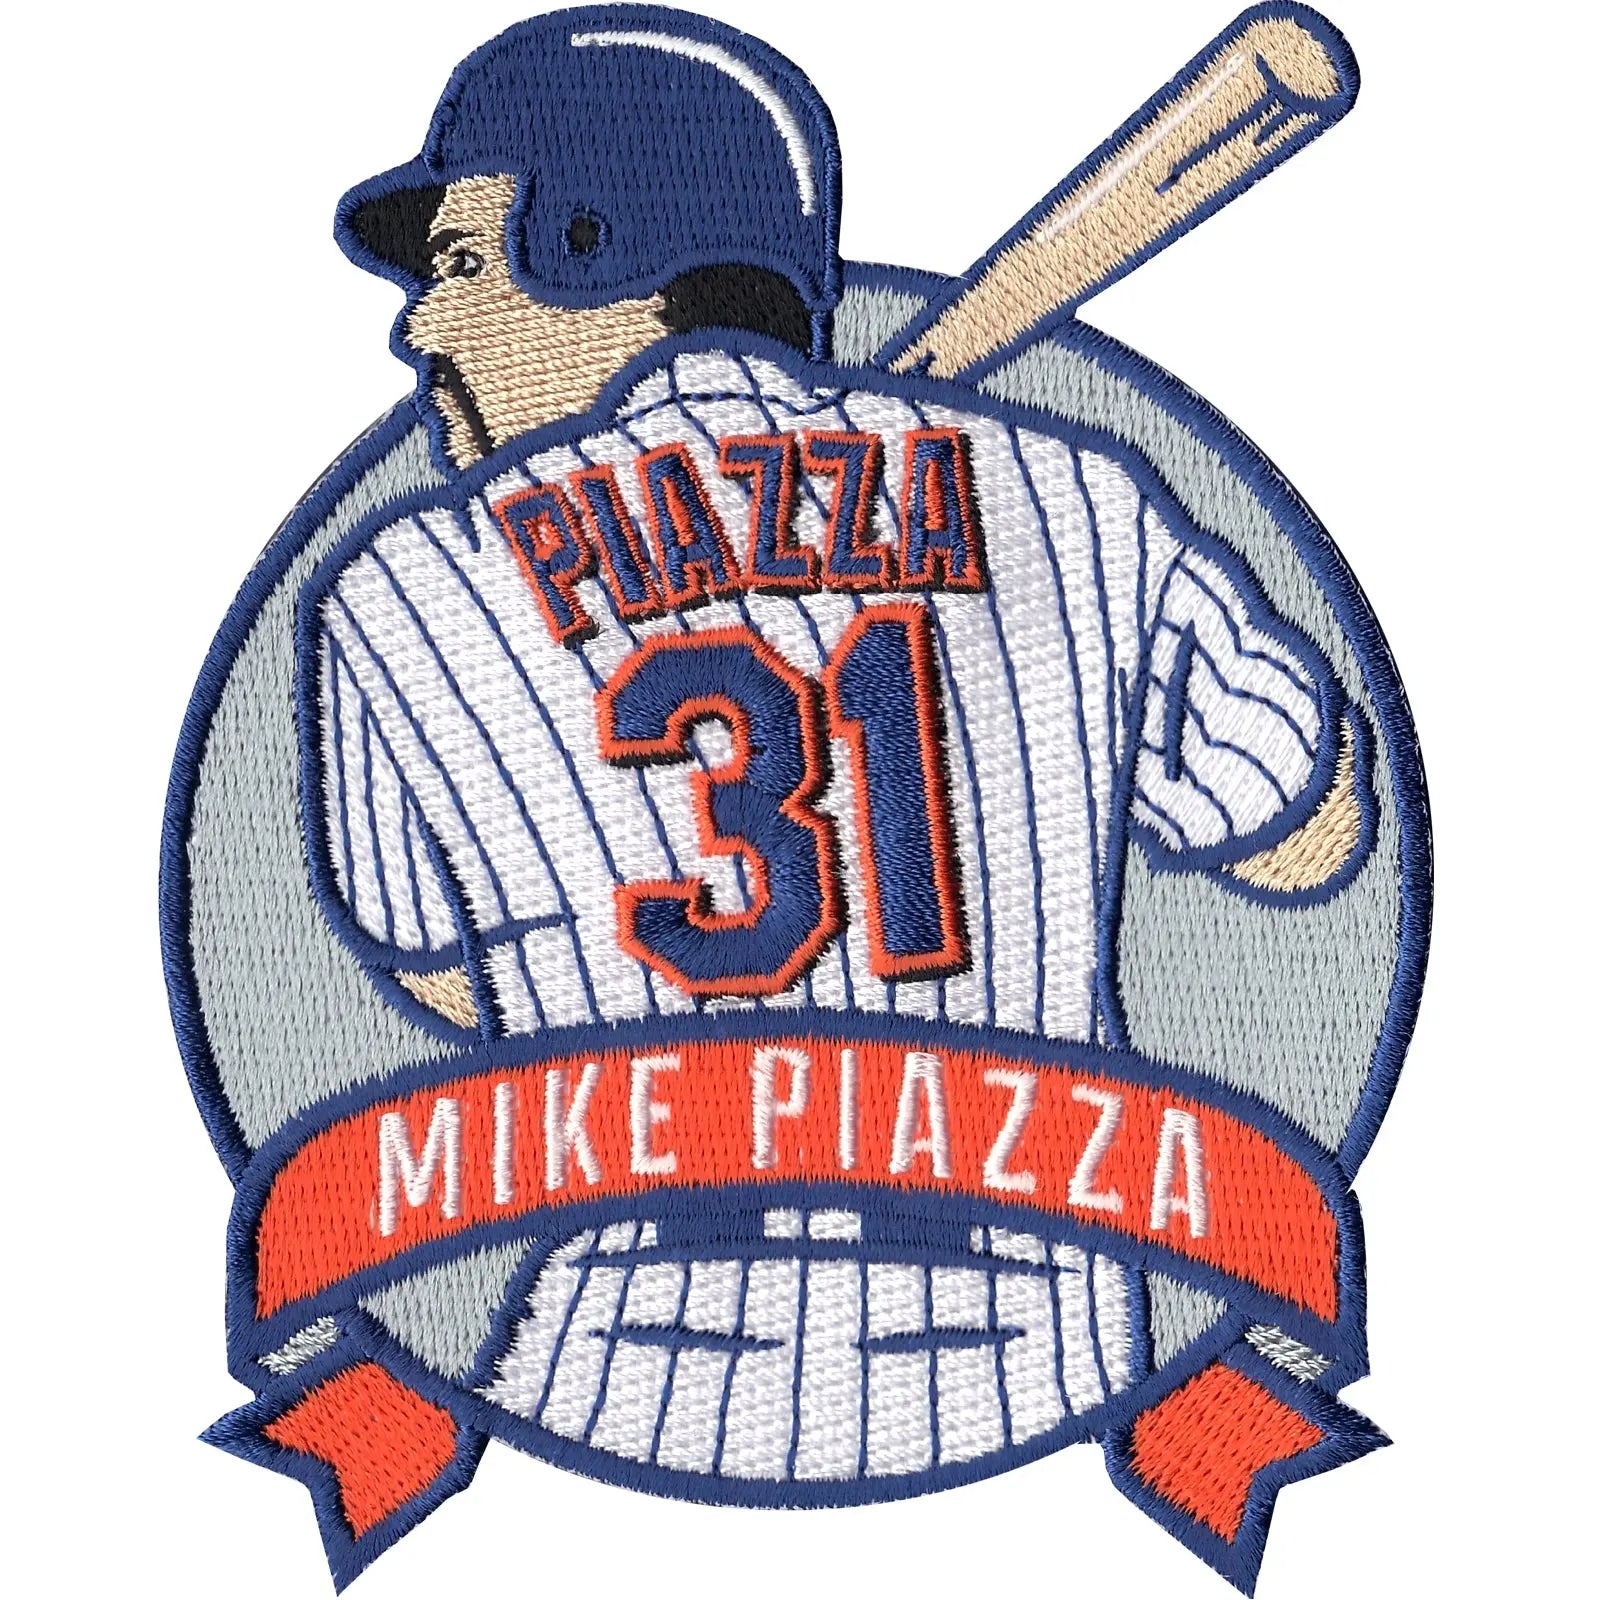 New York Mets Mike Piazza jersey